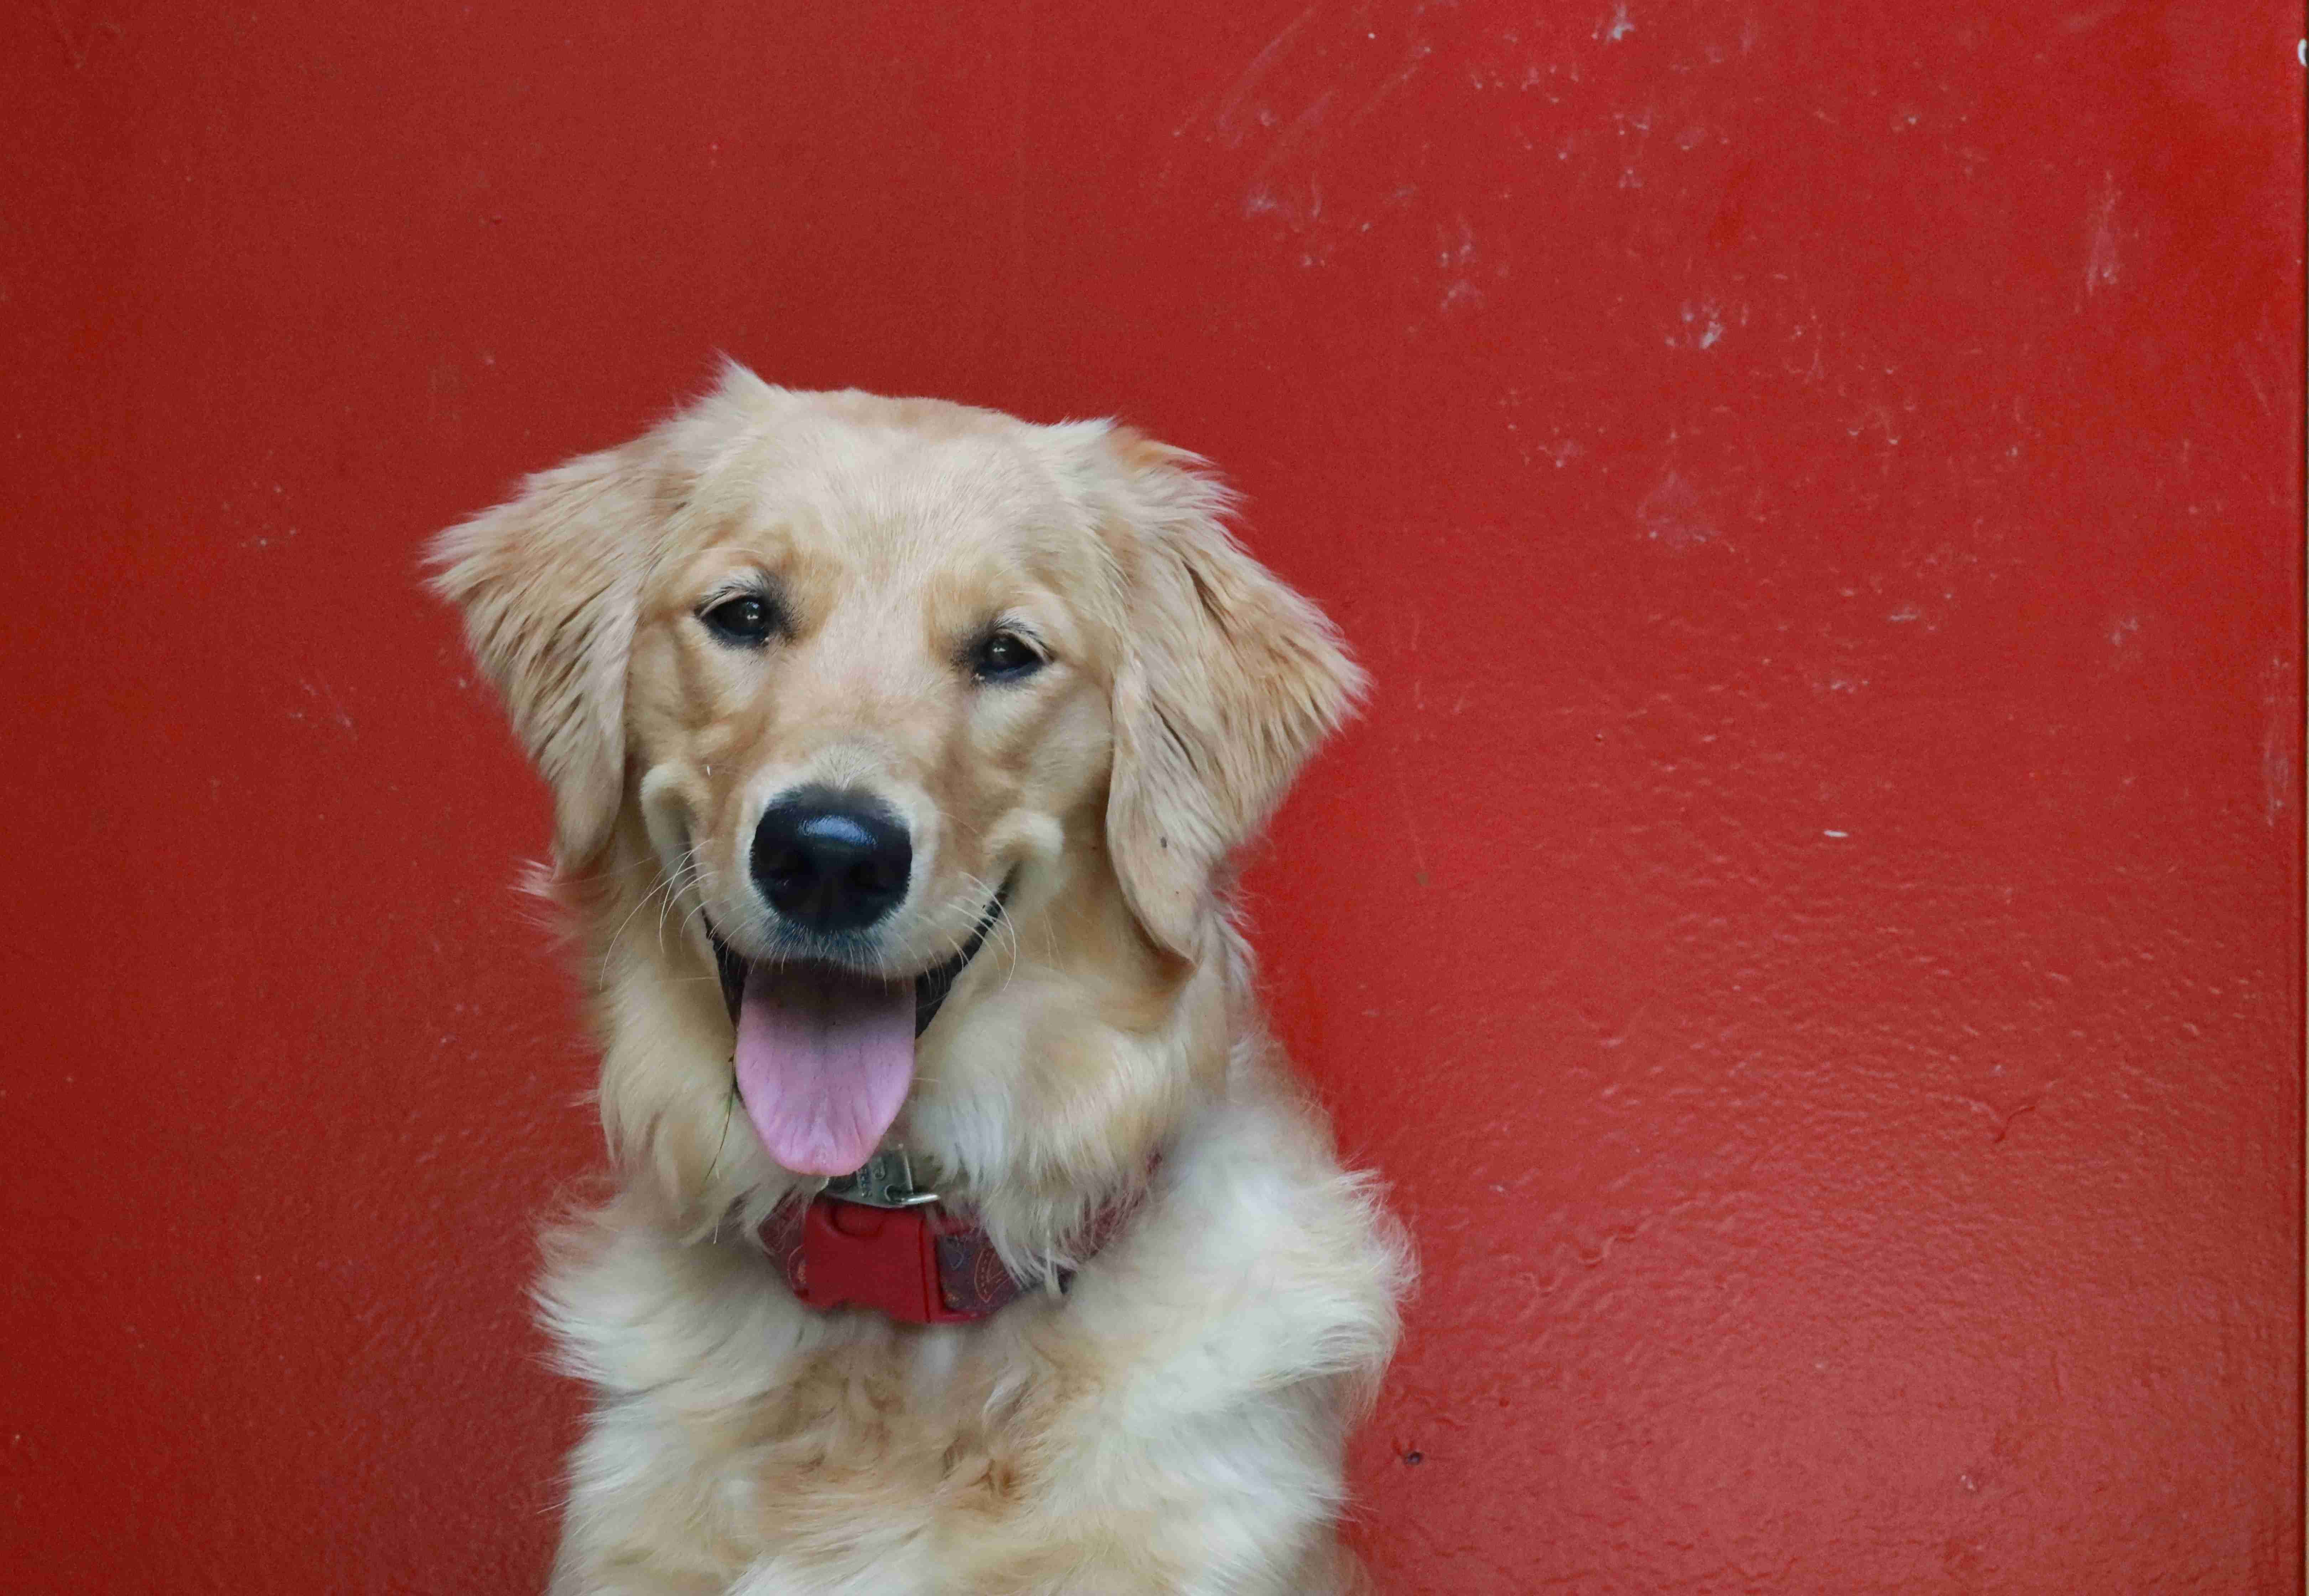 Can Golden Retrievers be prone to certain types of autoimmune diseases?